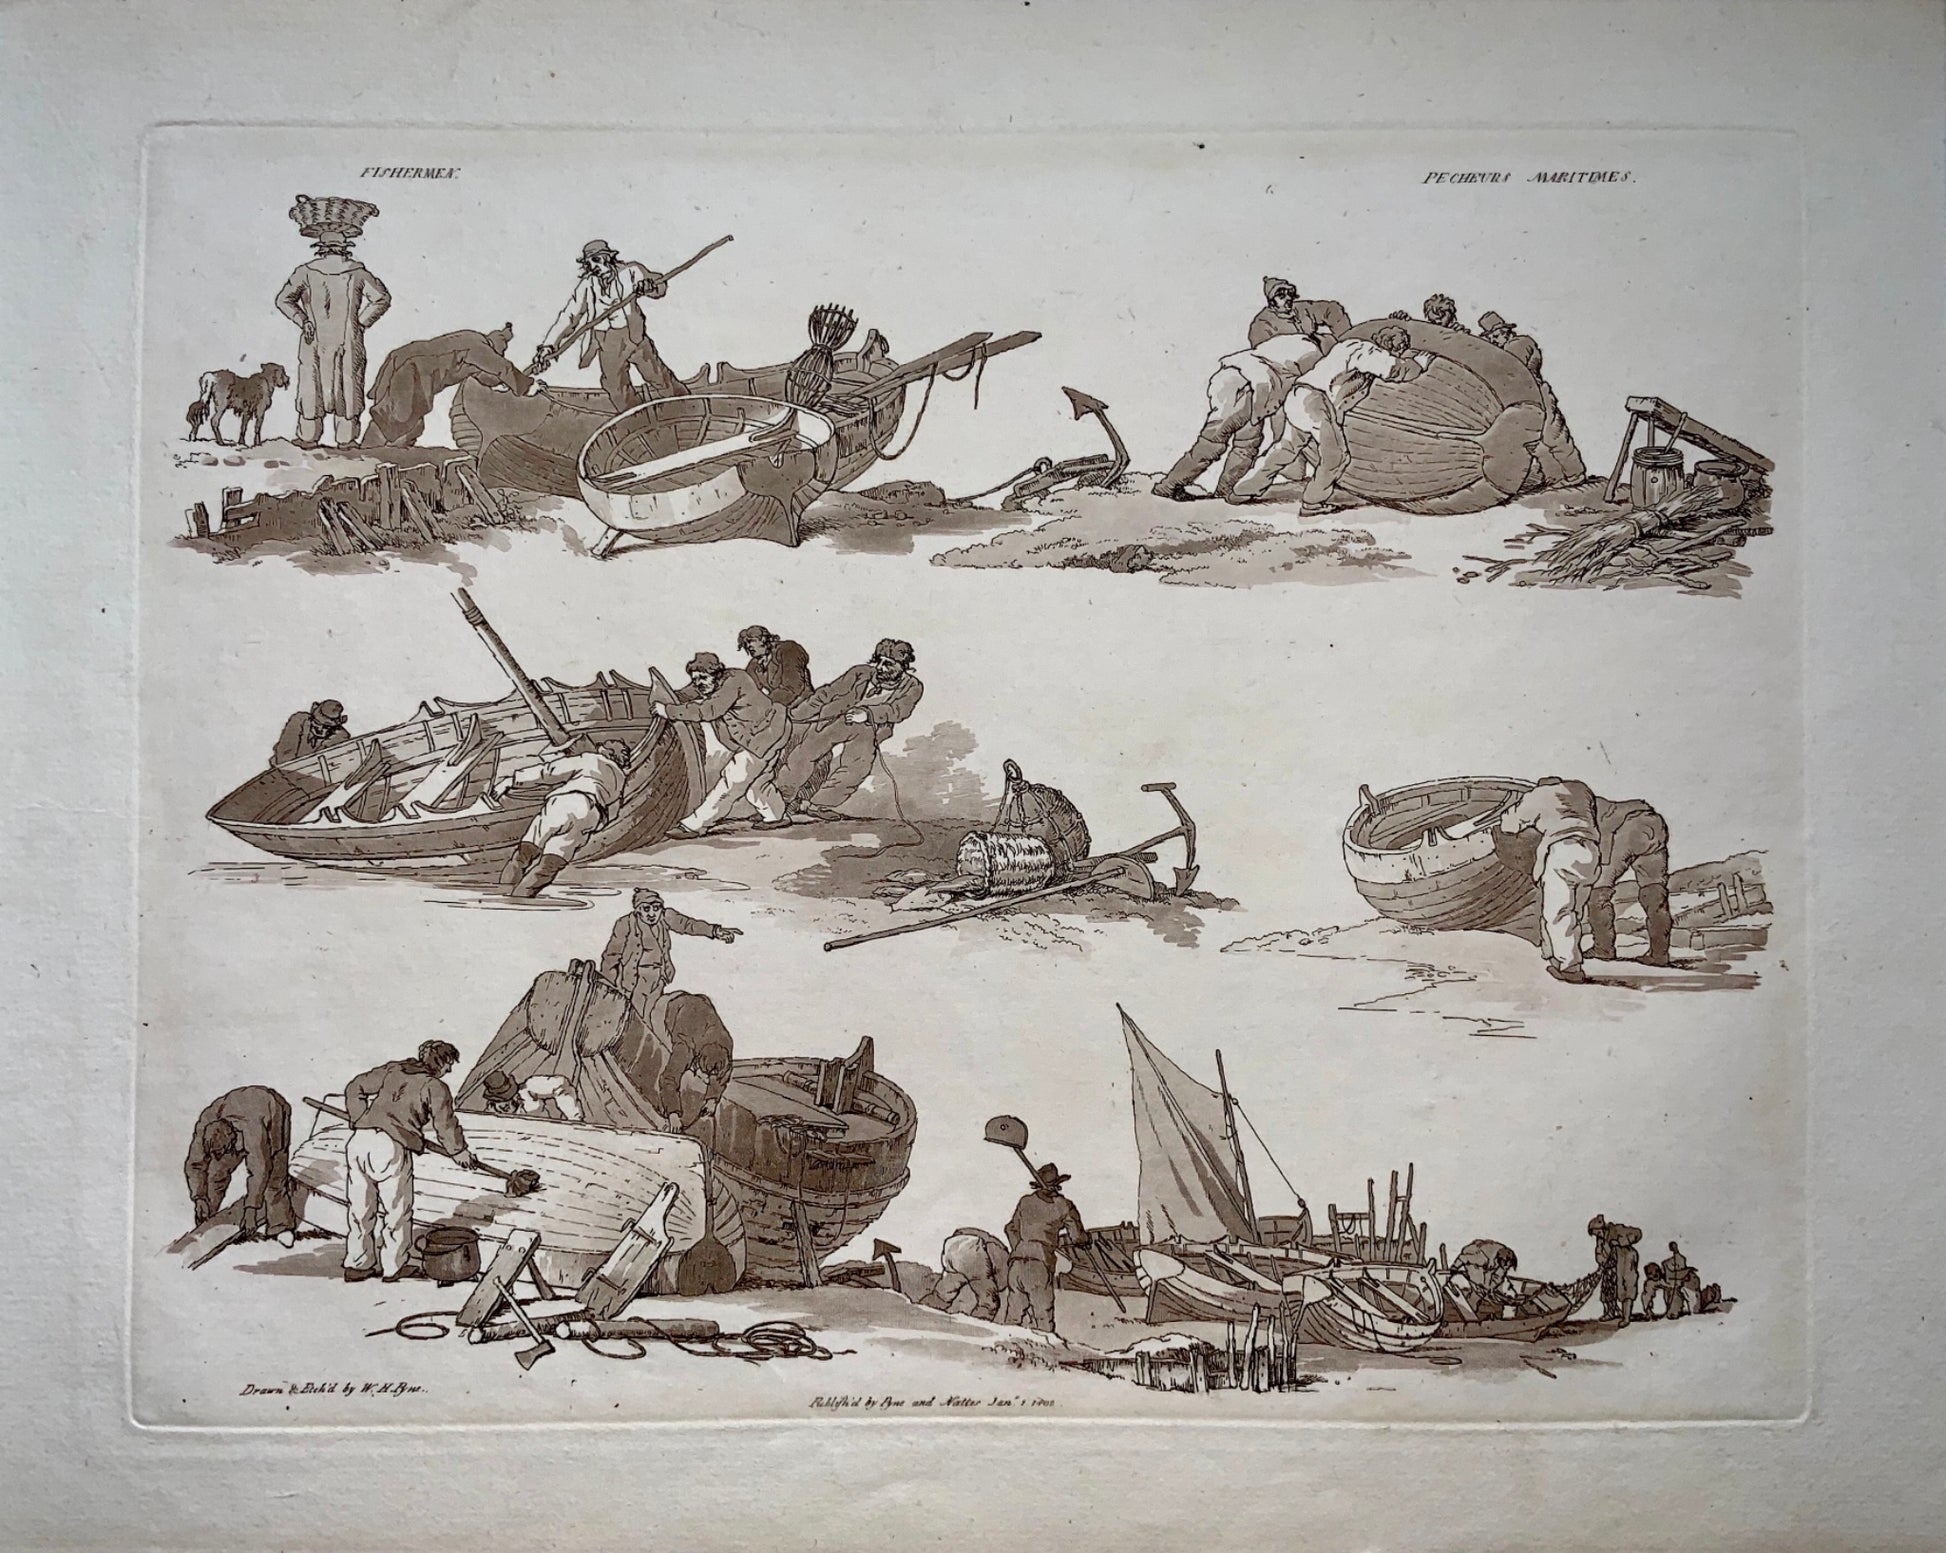 Sea Fishing - Sport - Aquatint by William Henry Pyne published in 1802